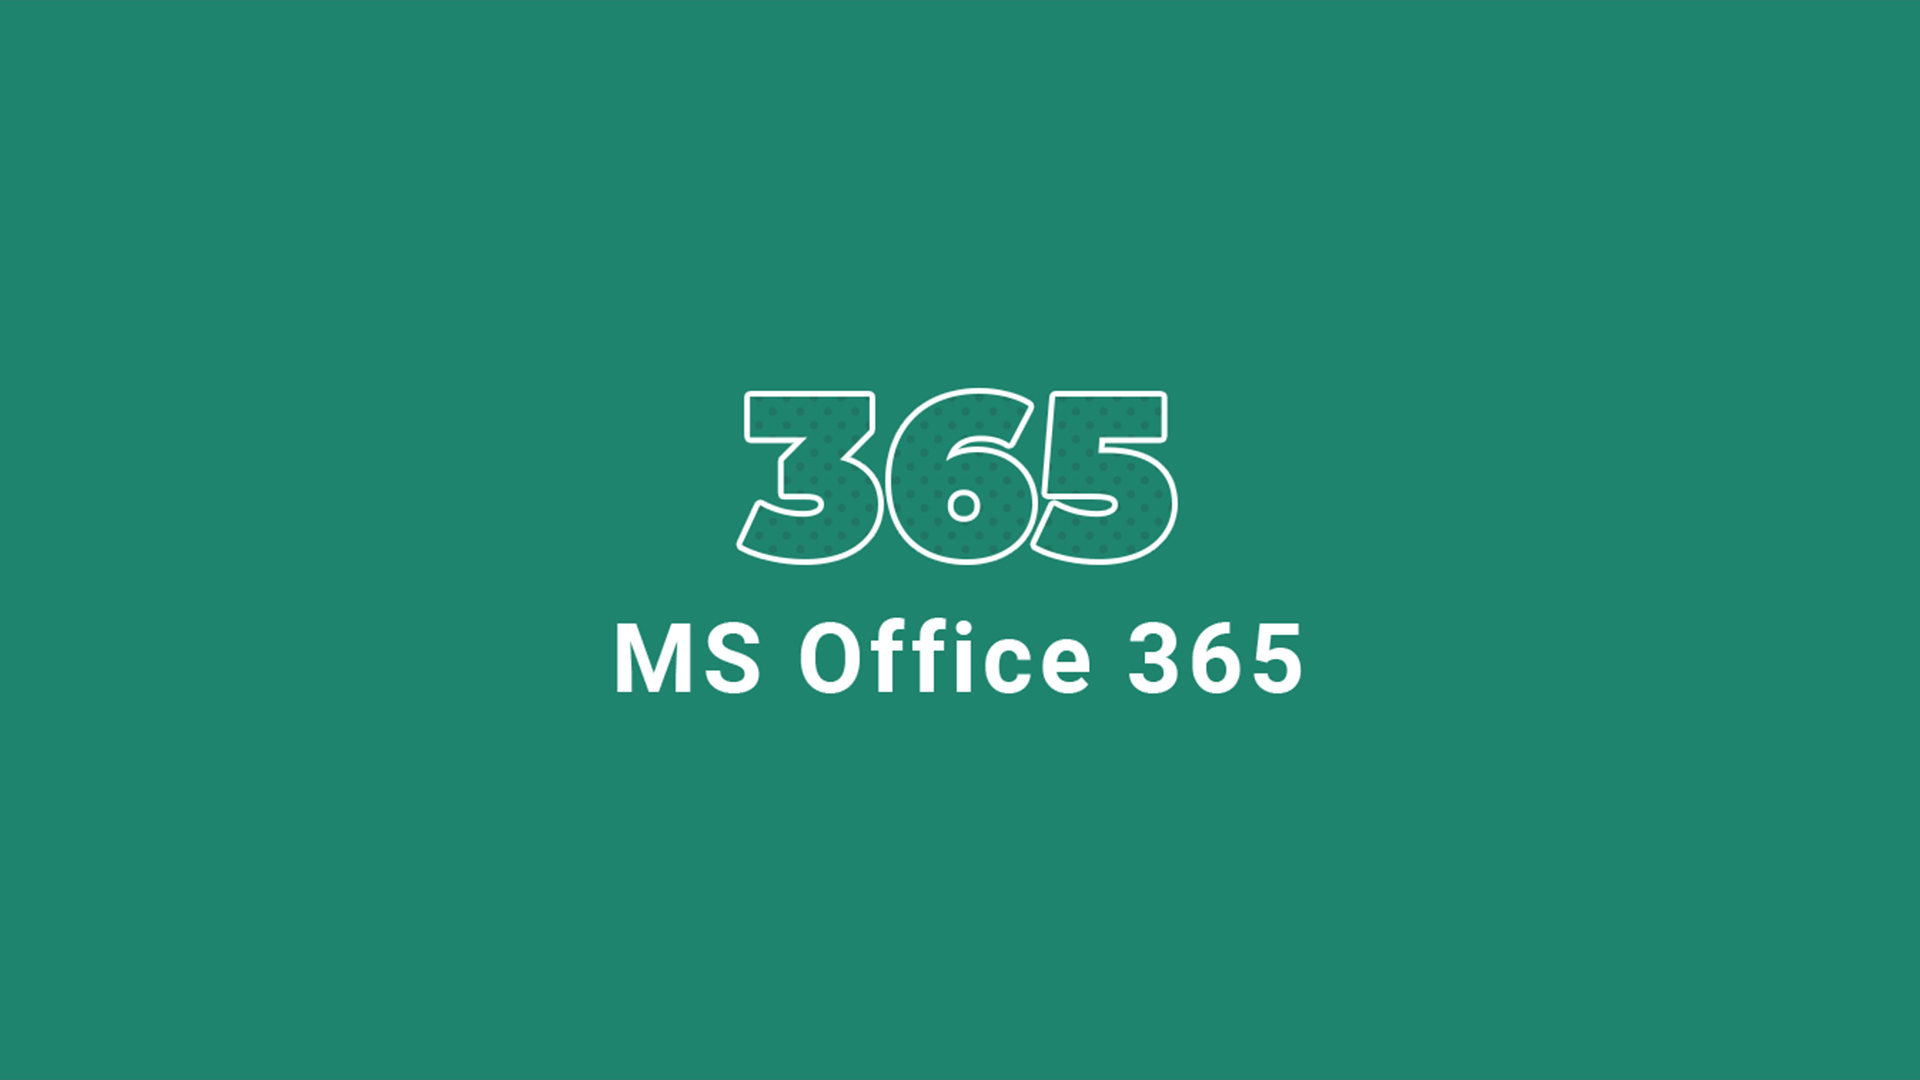 MS Office 365 Family Key (6 Months / 6 Devices) 56.49$